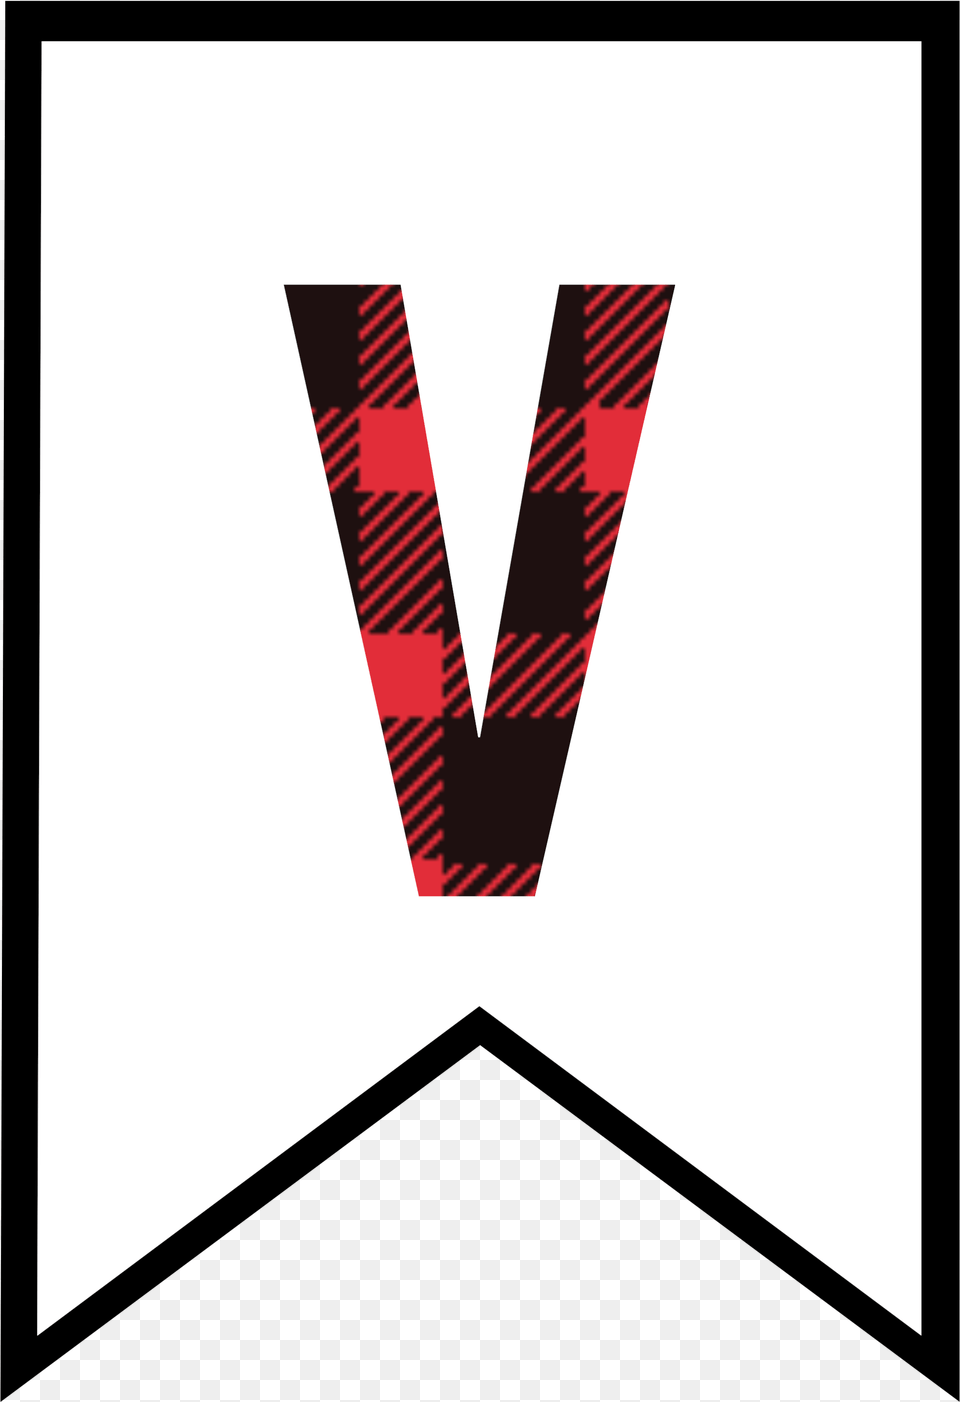 Letter Alphabet V Others Download Buffalo Plaid Border Template, Accessories, Formal Wear, Tie, Logo Png Image